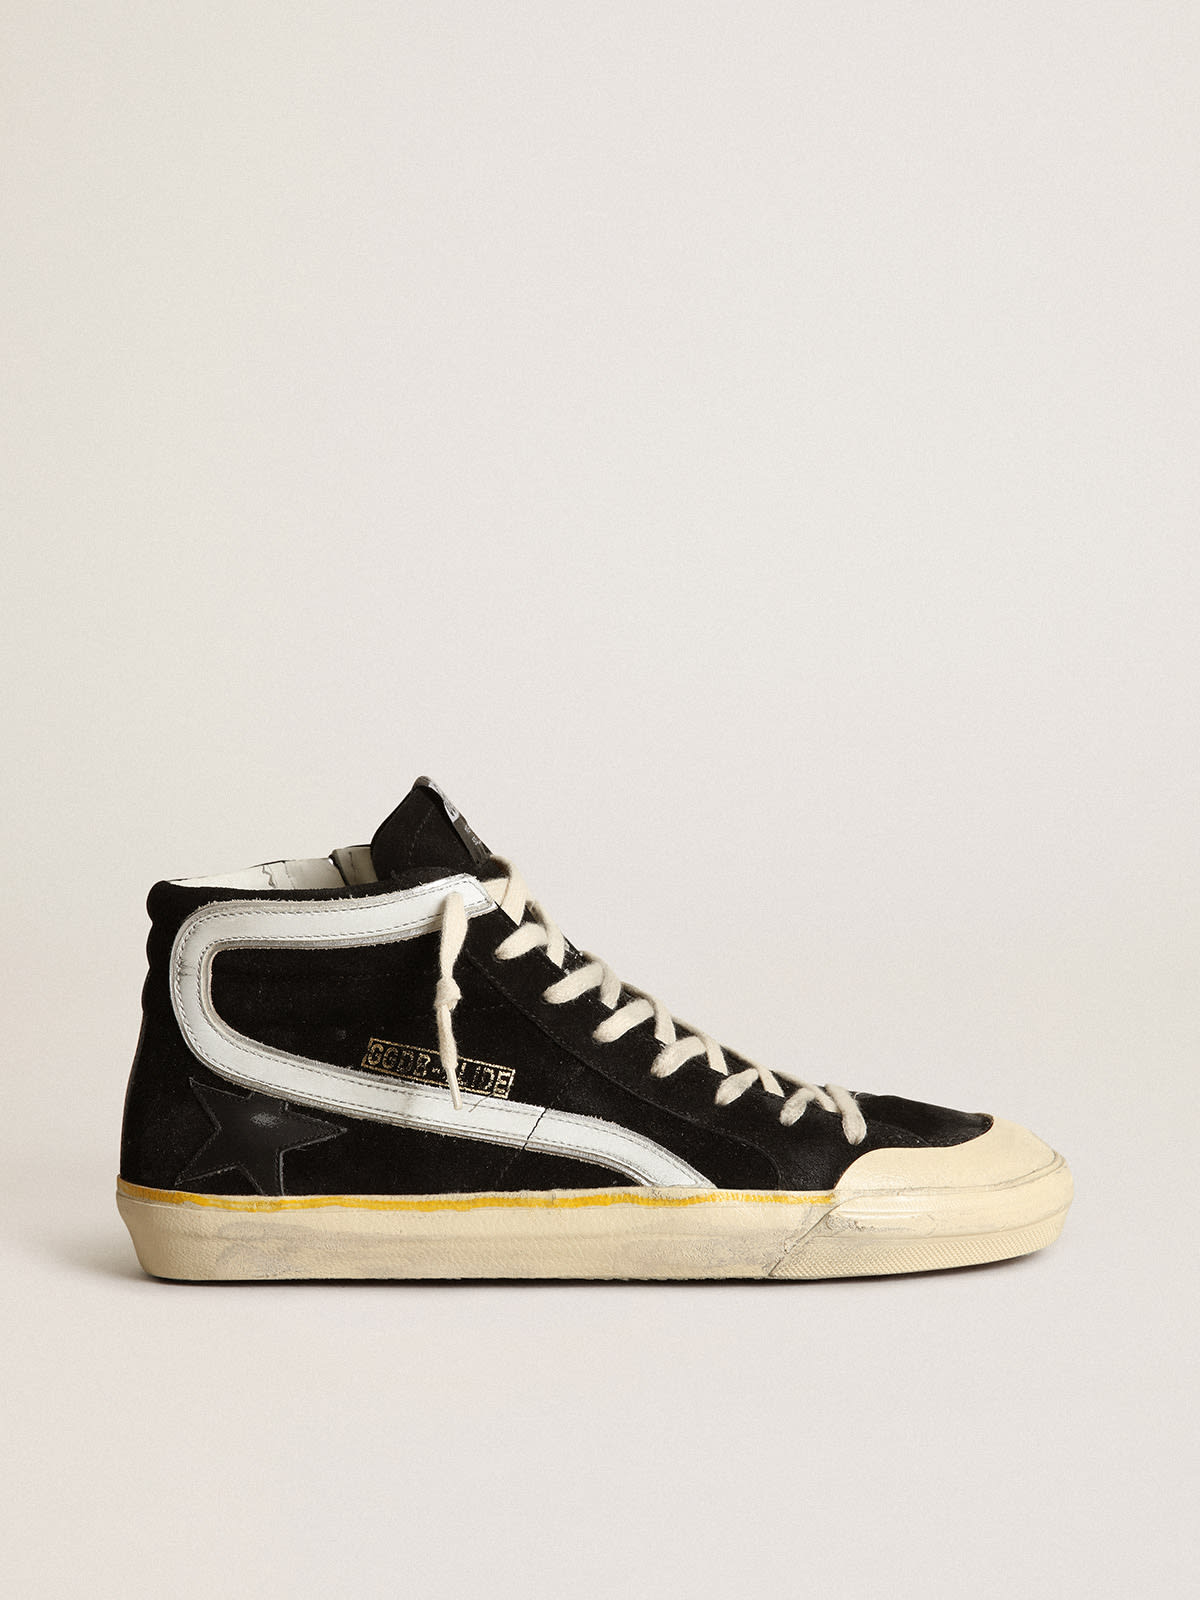 Golden Goose - Slide Penstar sneakers in black suede with black leather star and white leather flash in 